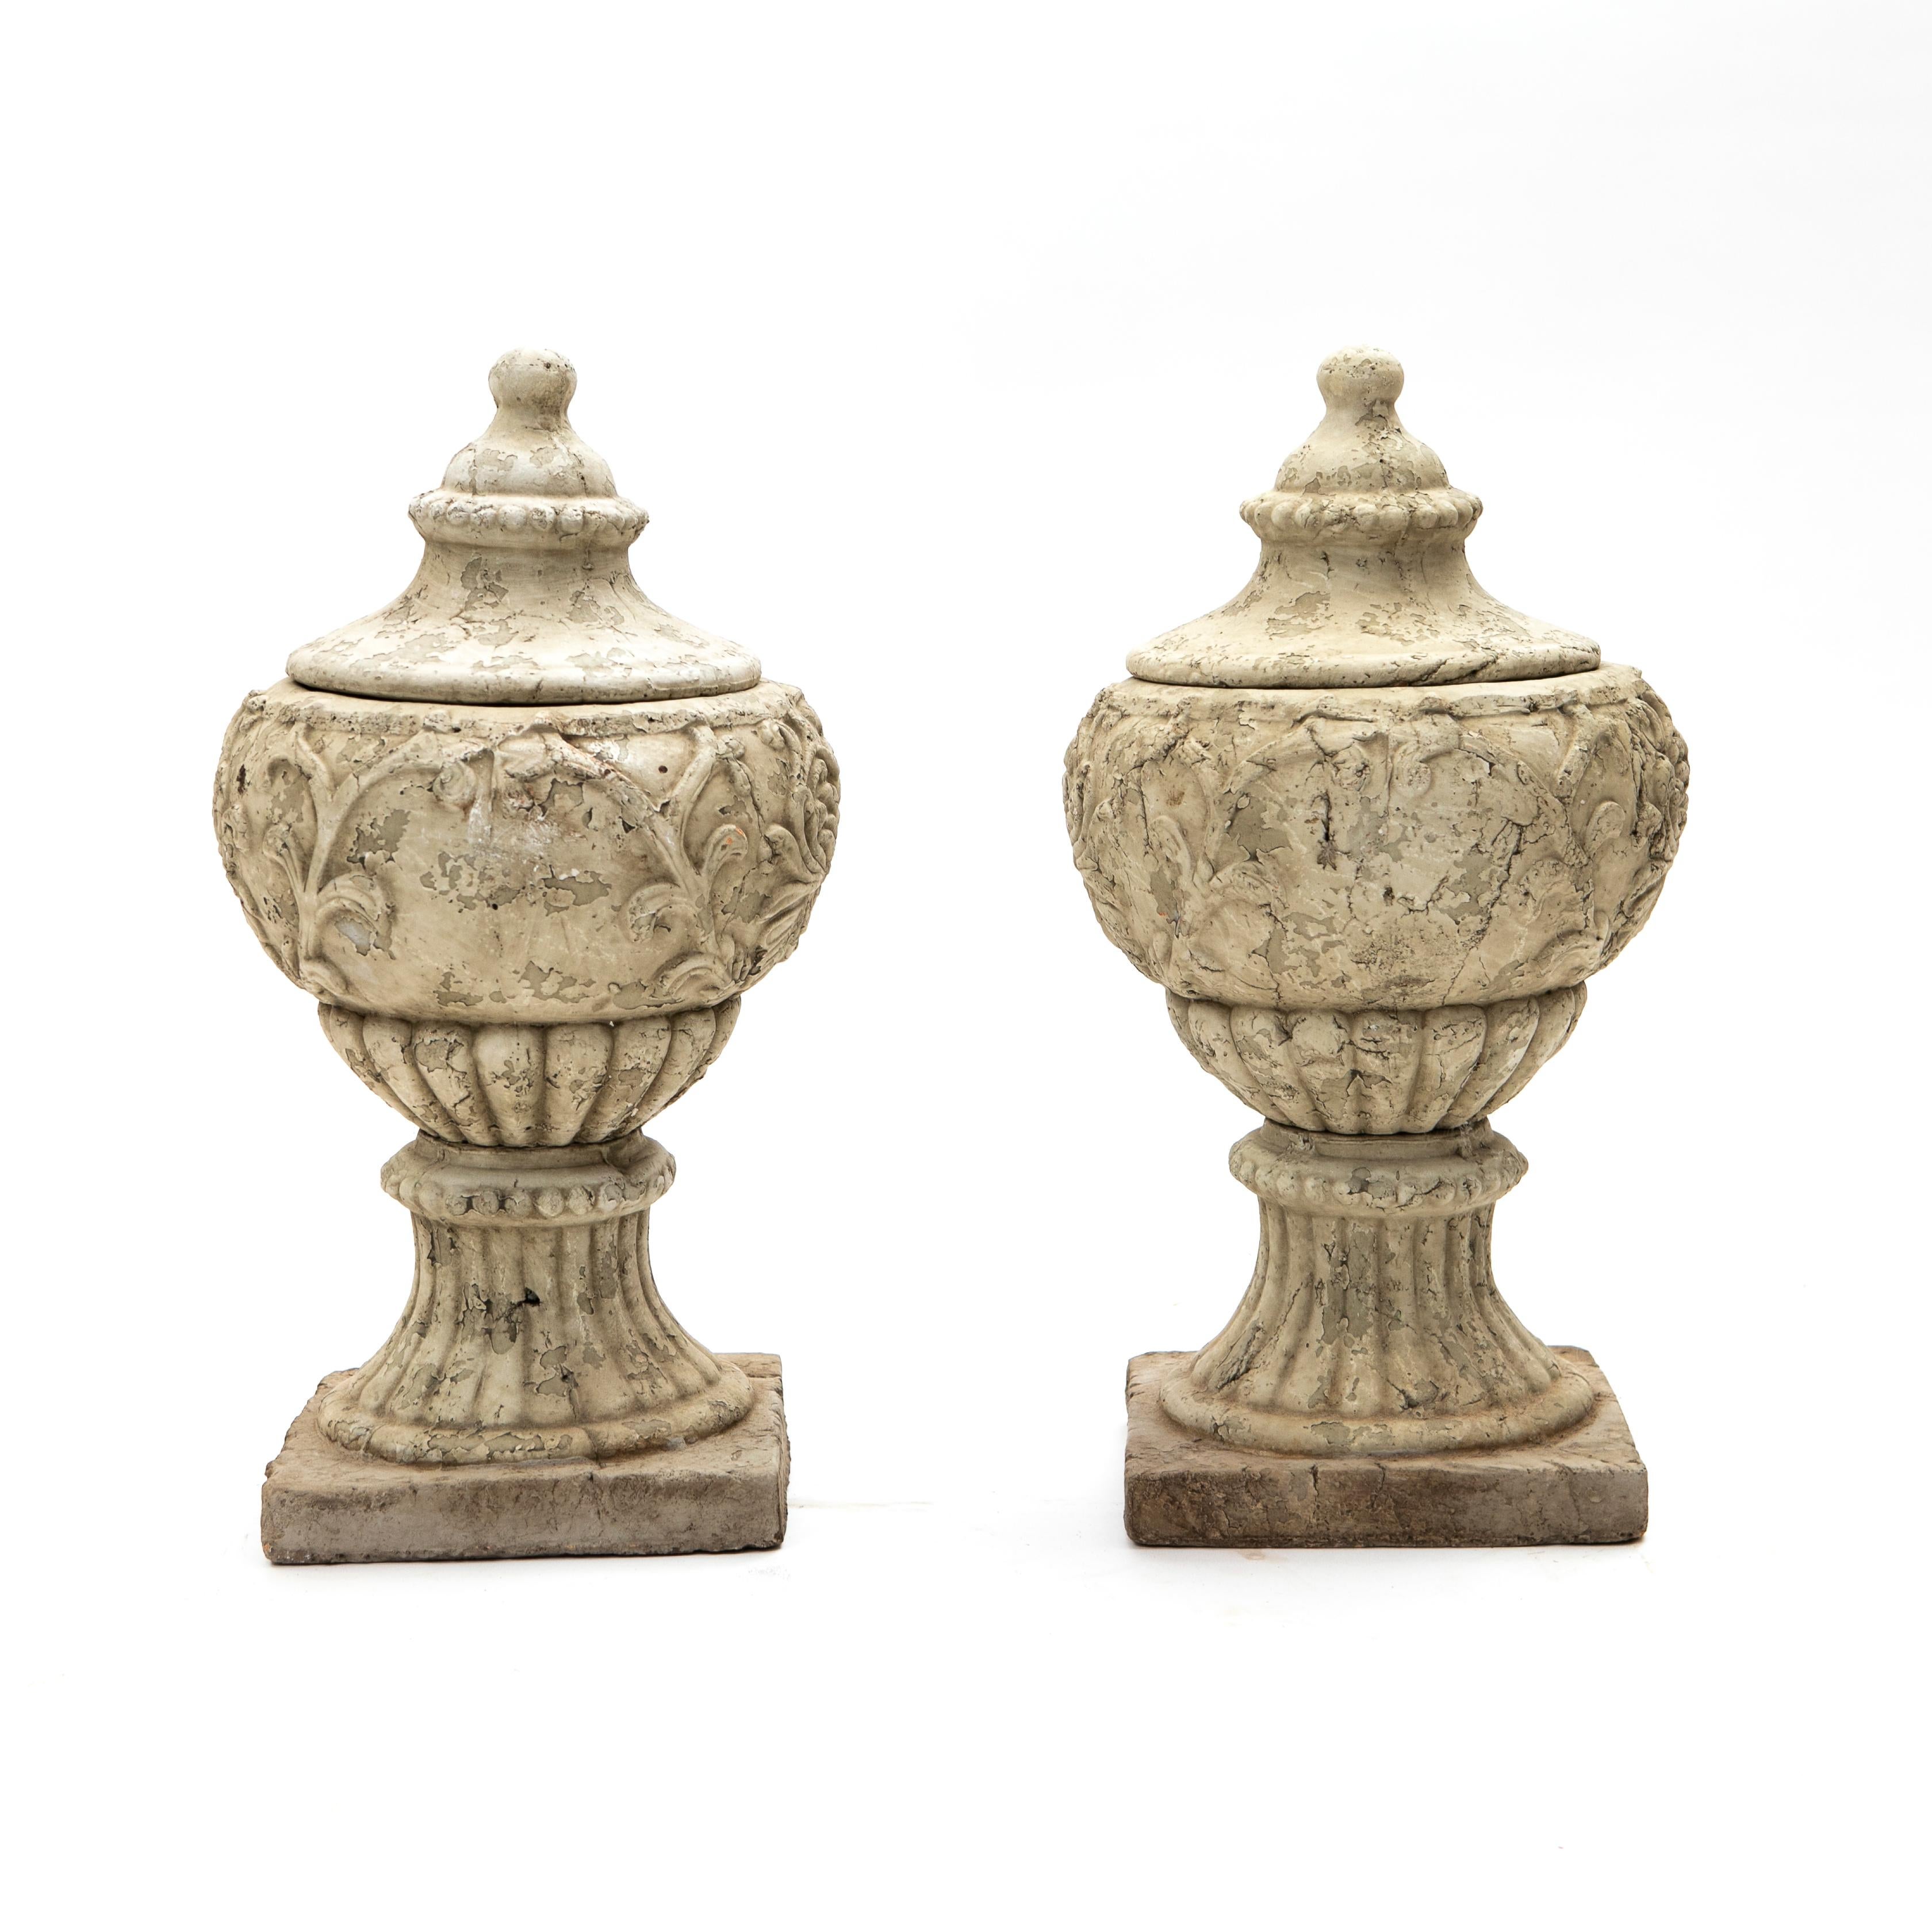 Pair of decorative Italian urns with lid made of grey painted terracotta with natural age-related patina.

Each with scrolling foliate relief and fluted decoration raised on pedestal bases.

Italy 1850-1870.